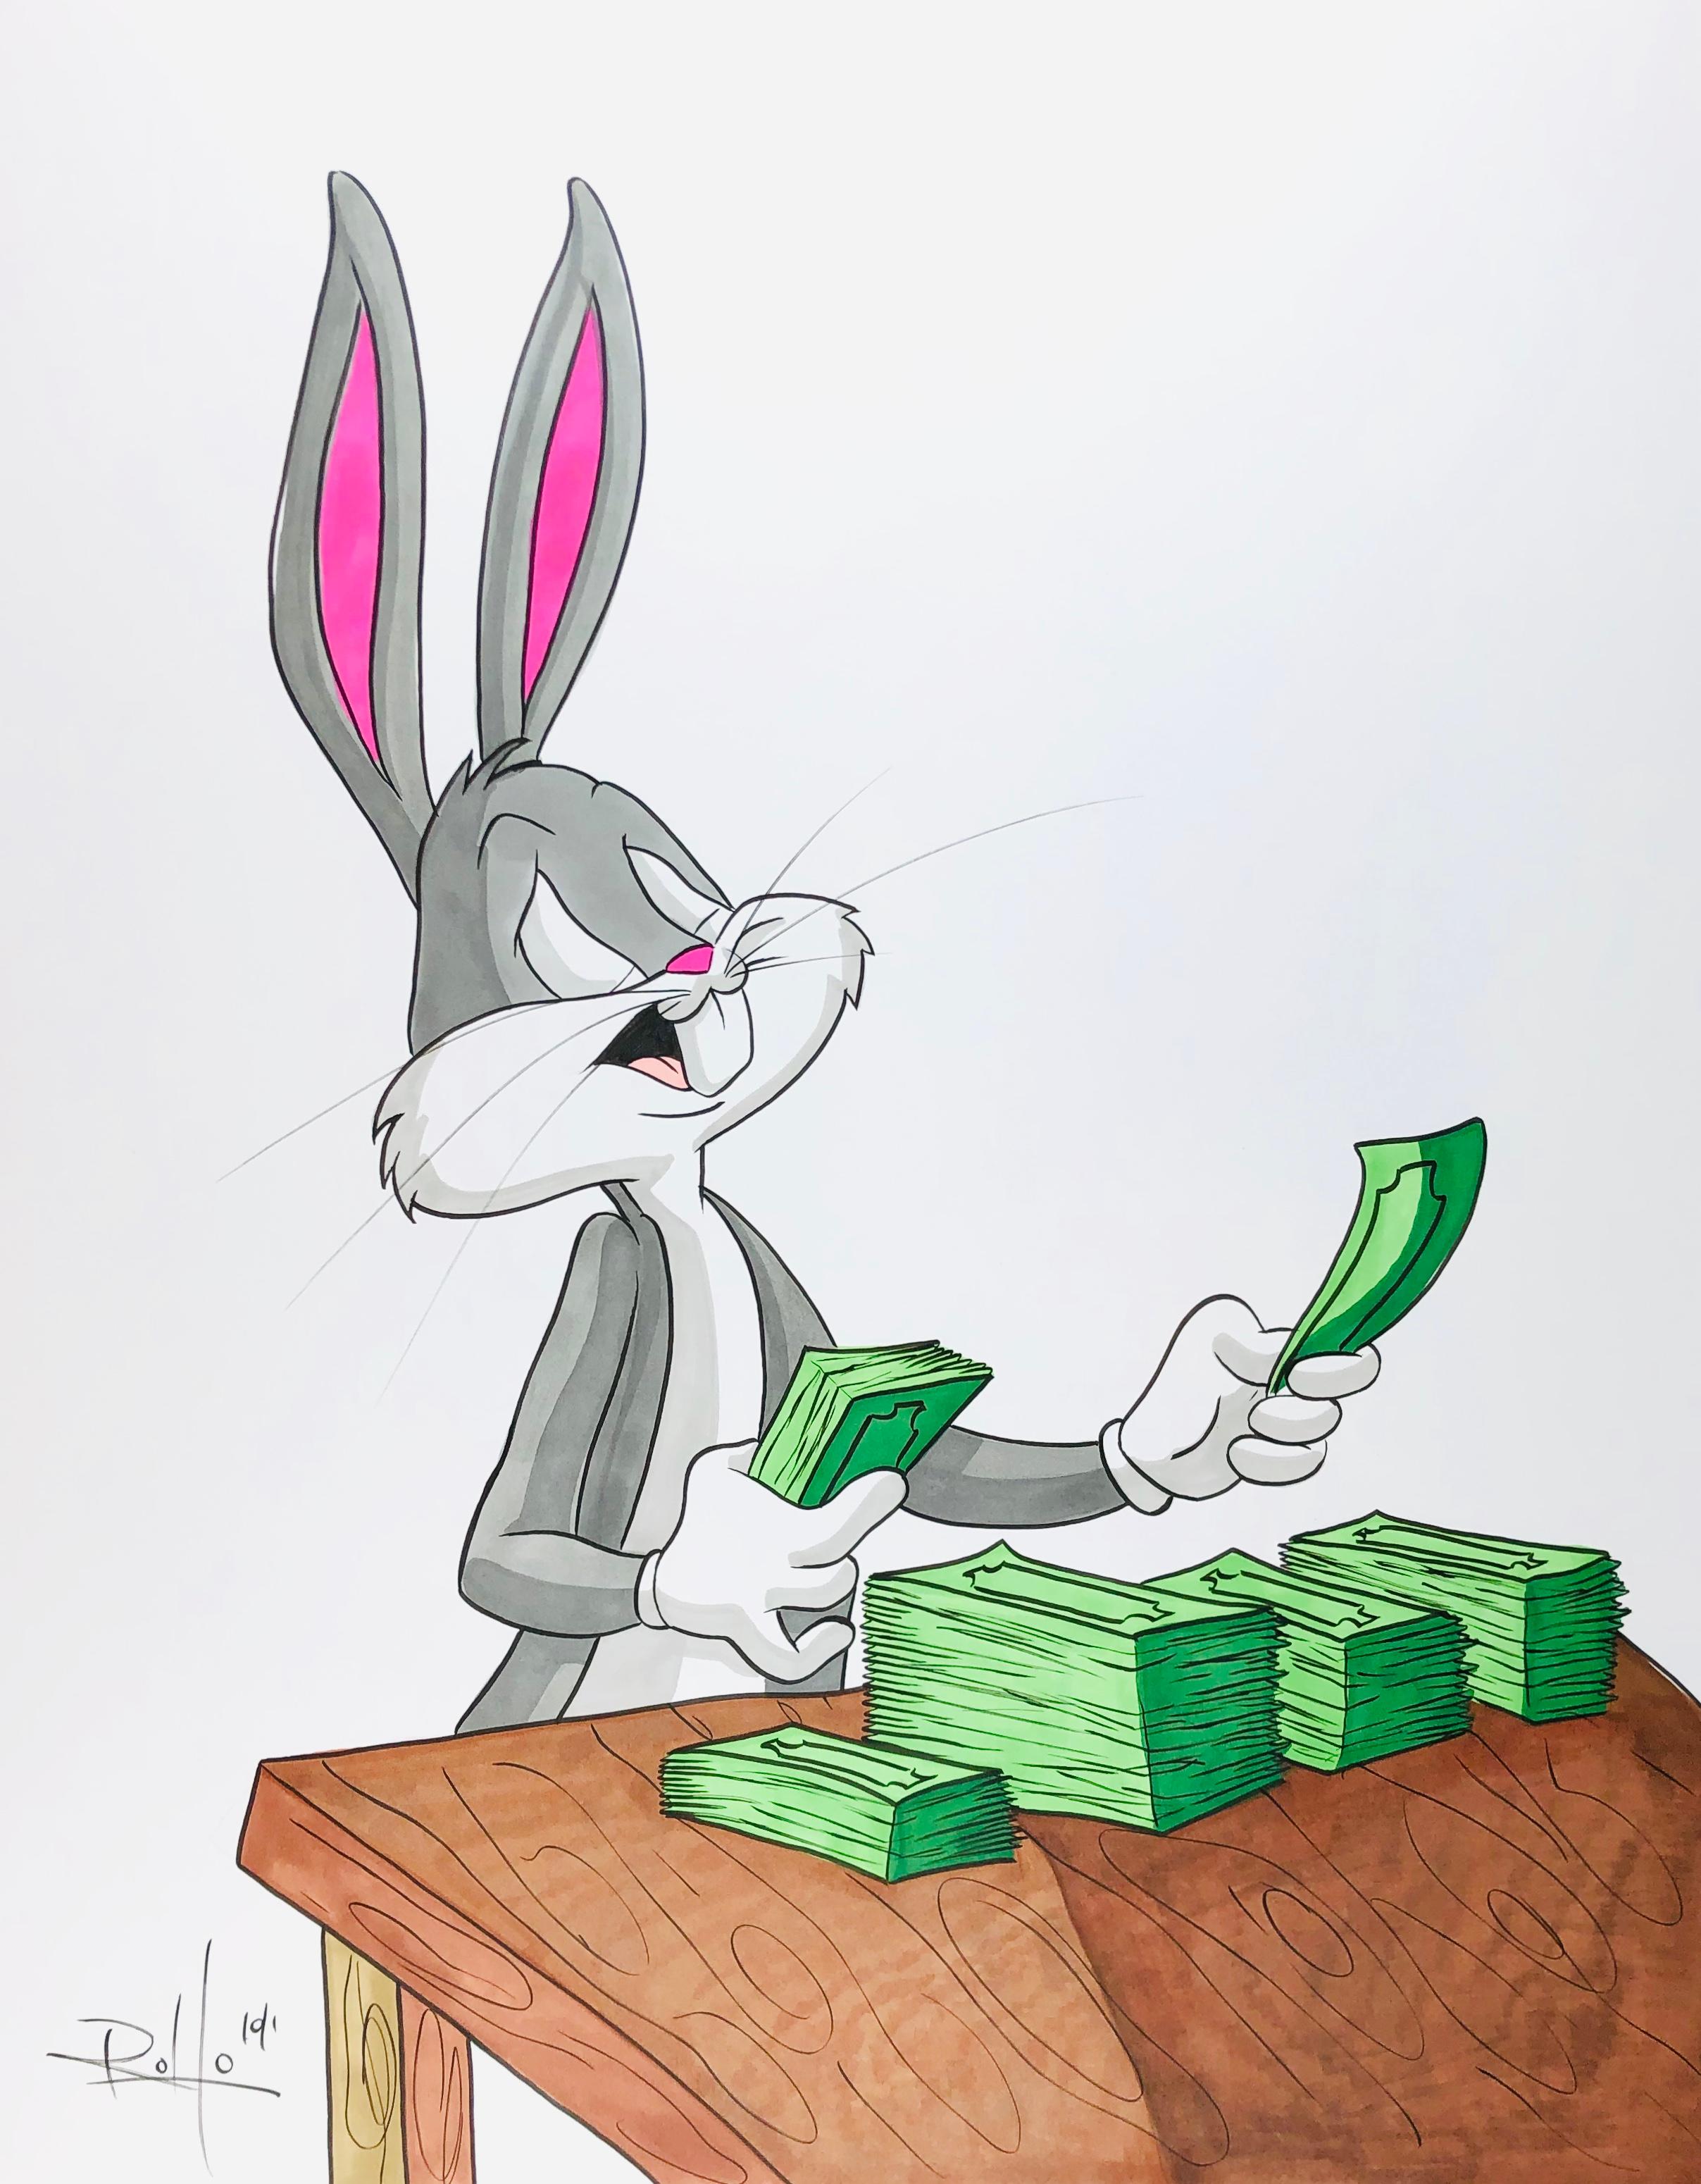 Bugs Money - Painting by George Rollo